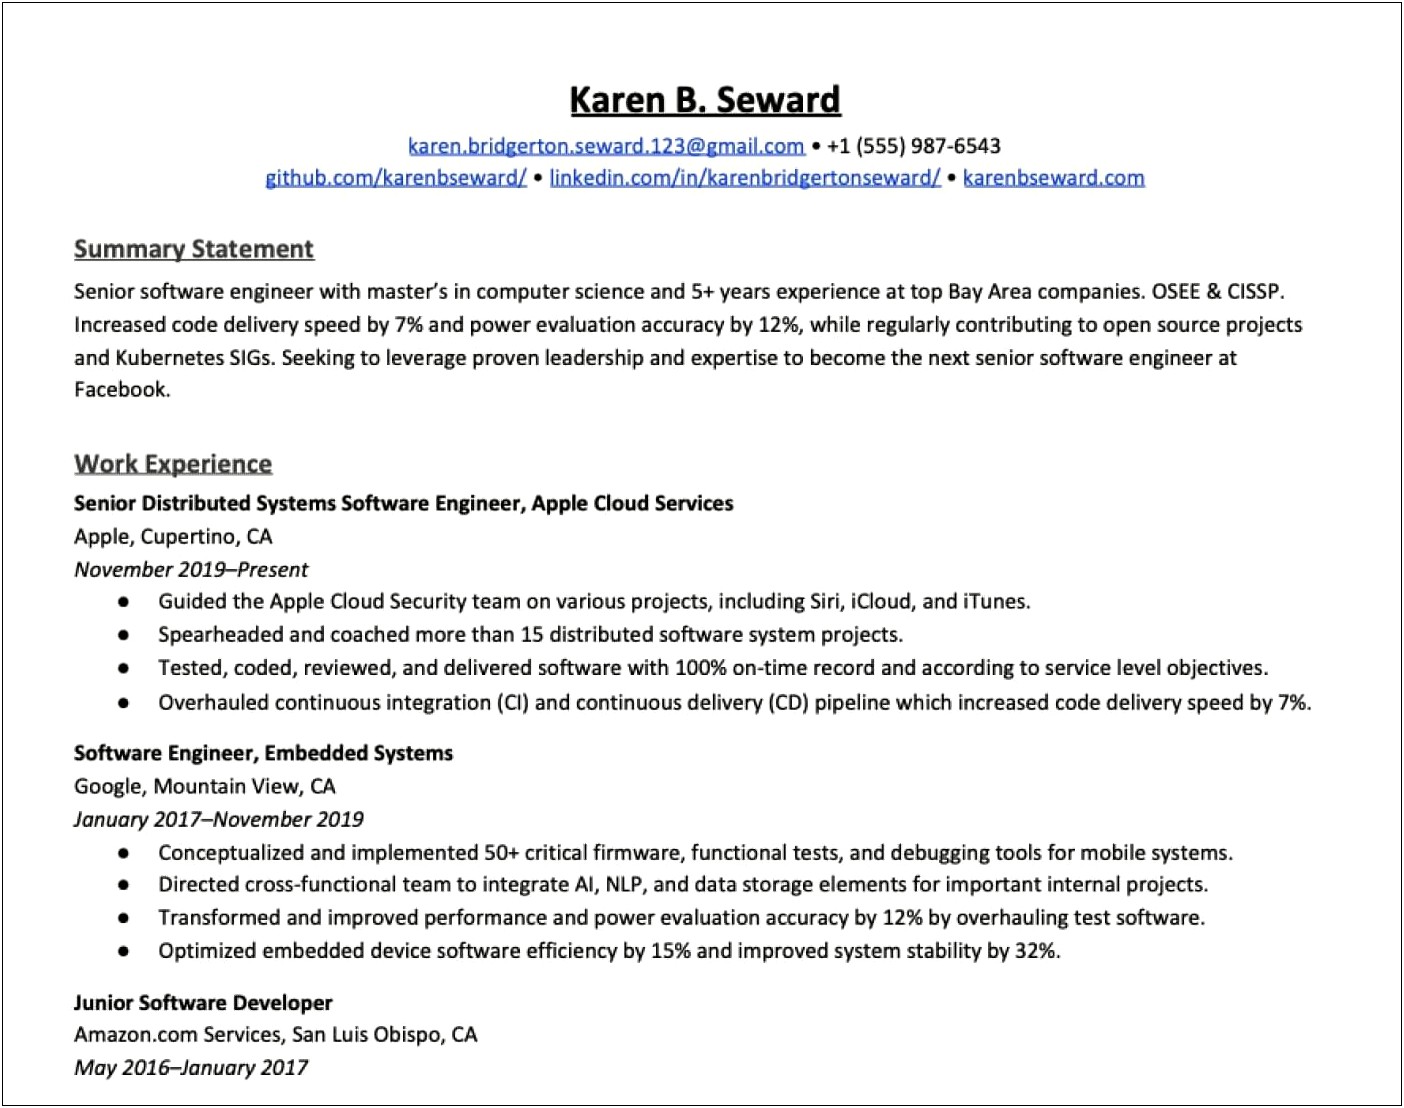 Resume Experience Most Recent At Top Or Bottom